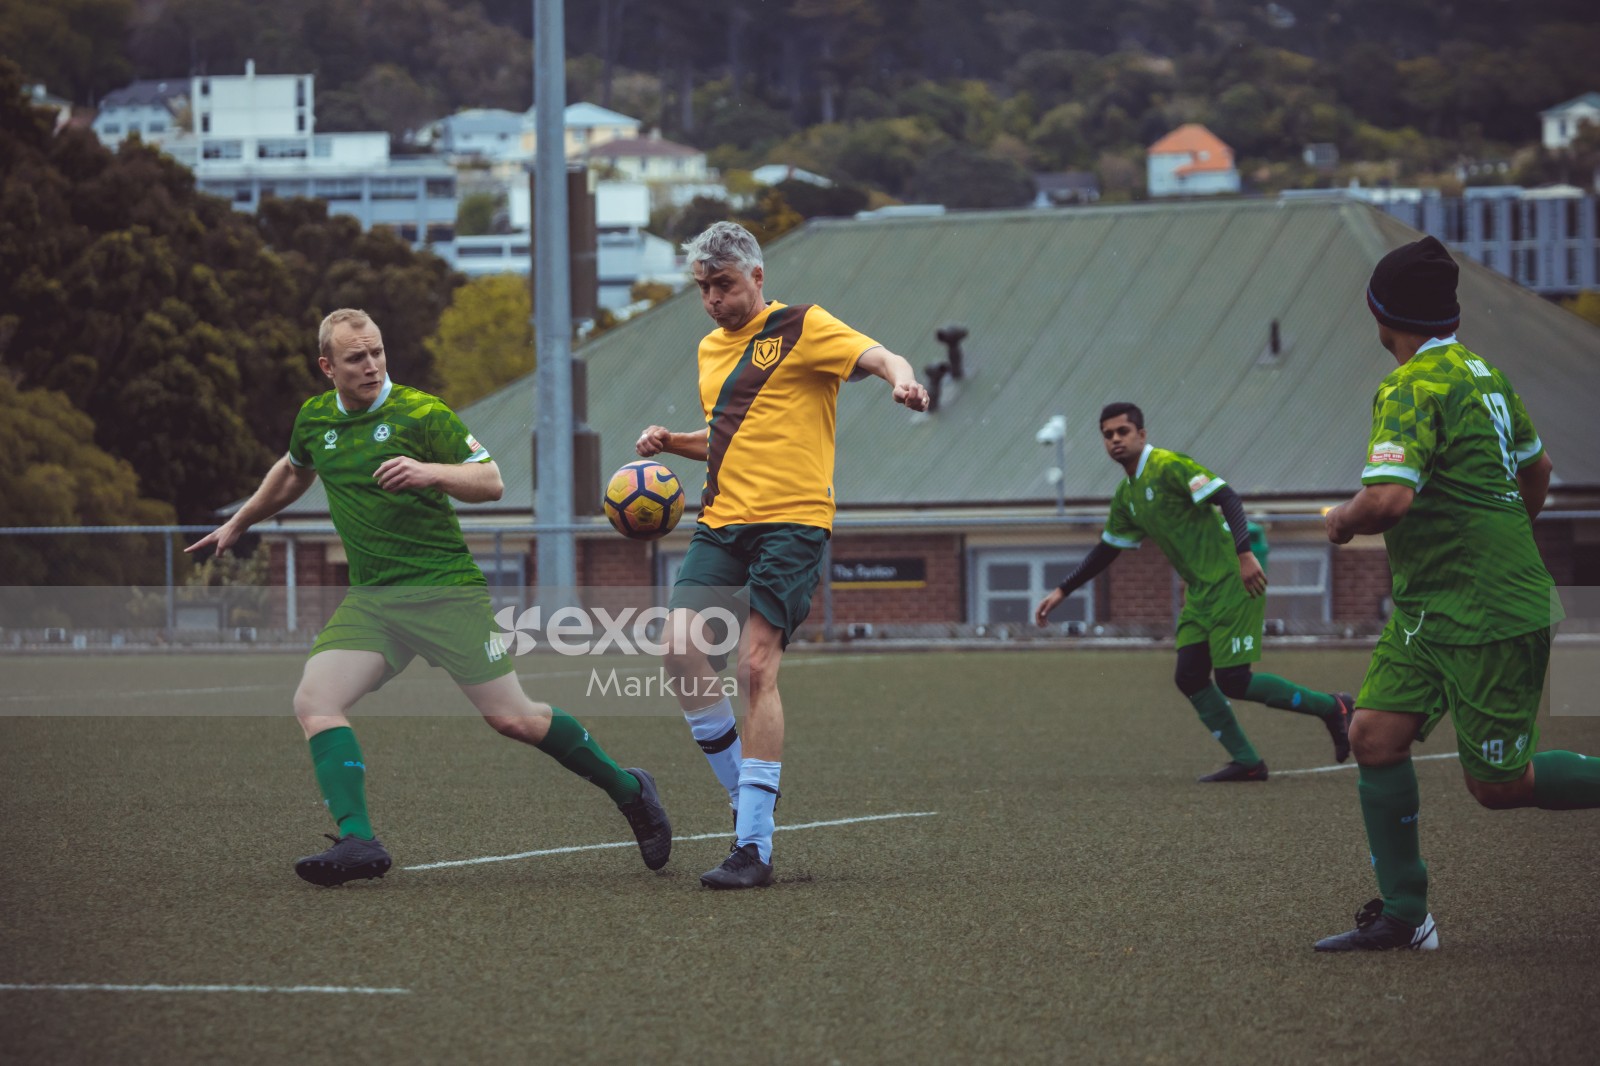 Player in yellow shirt trying to intercept football in mid air - Sports Zone sunday league